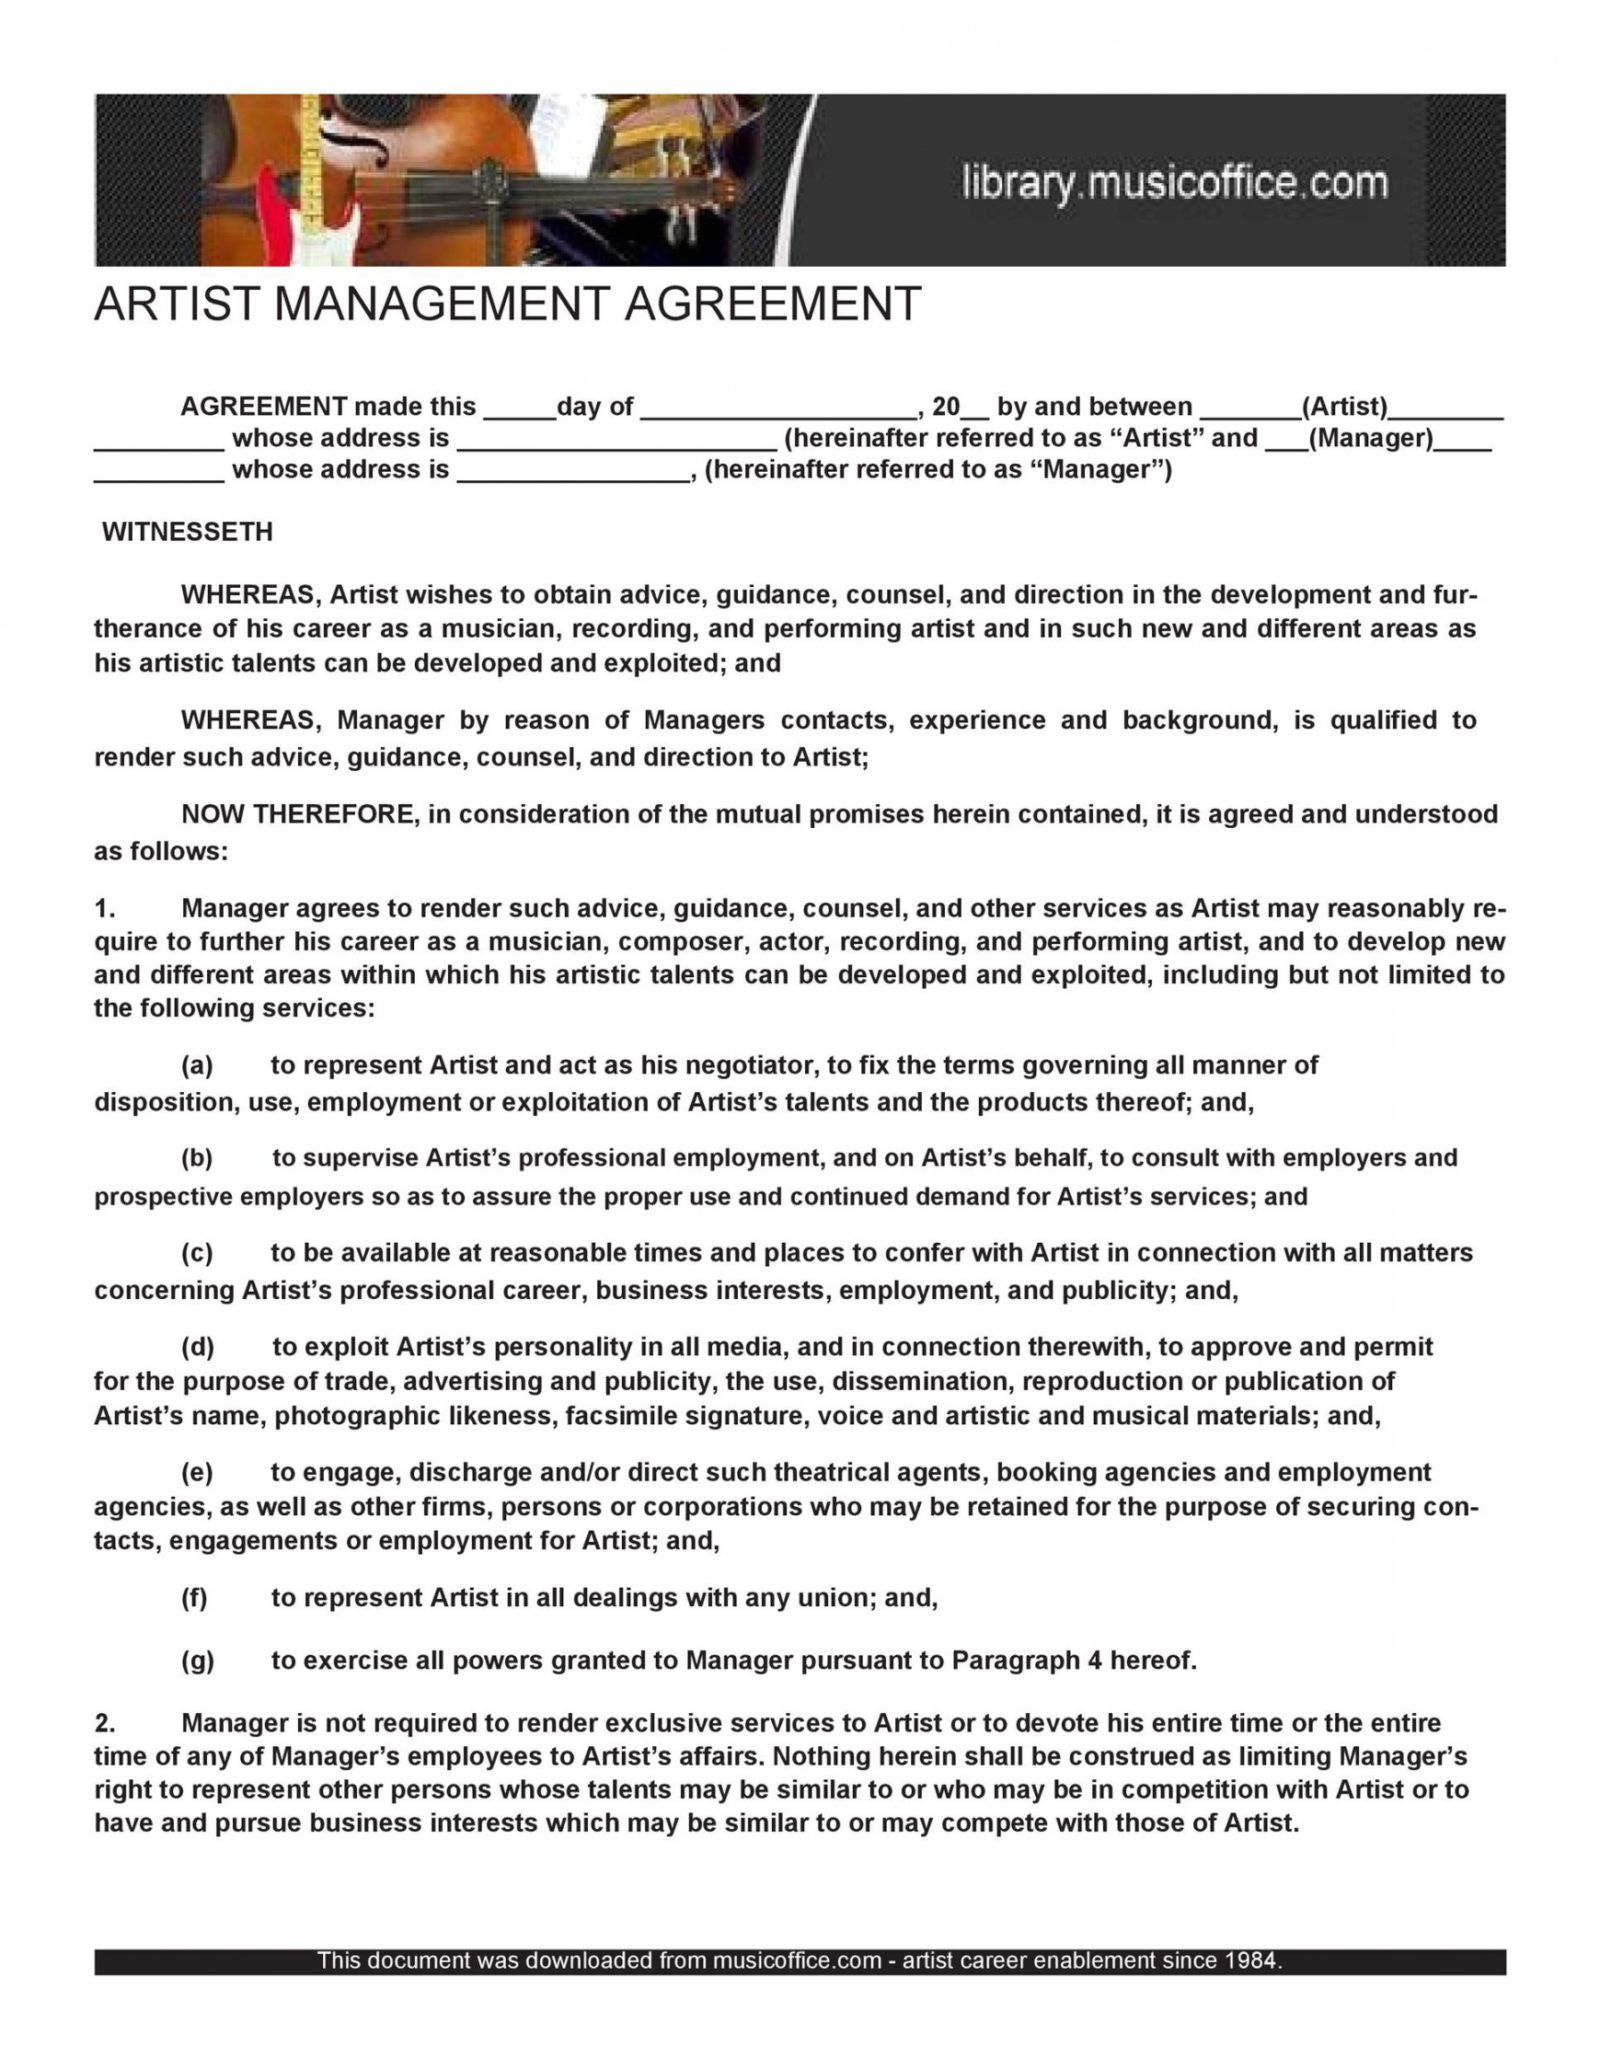 Free 50 Artist Management Contract Templates Ms Word Intended For Simple Music Management Contract Template